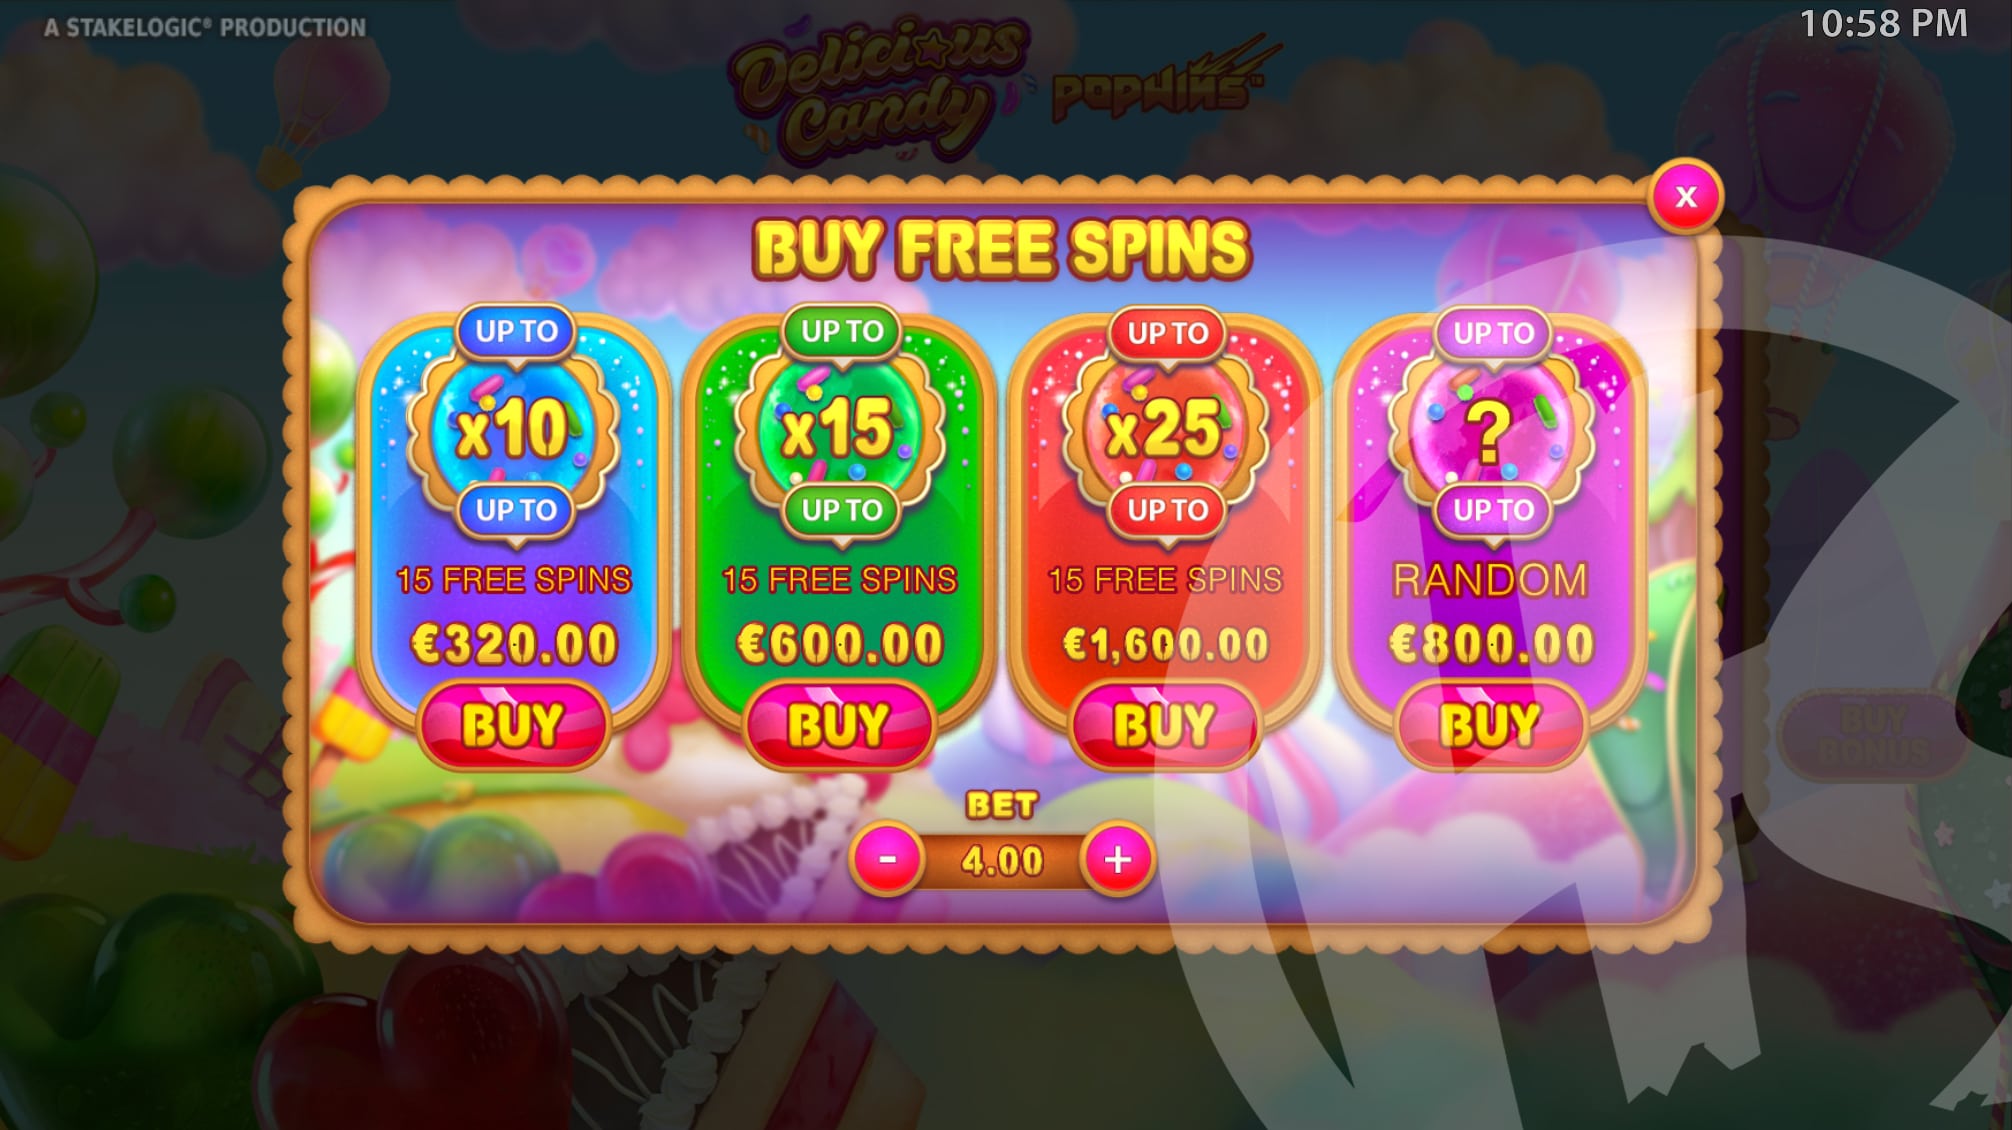 Buy Free Spins Options